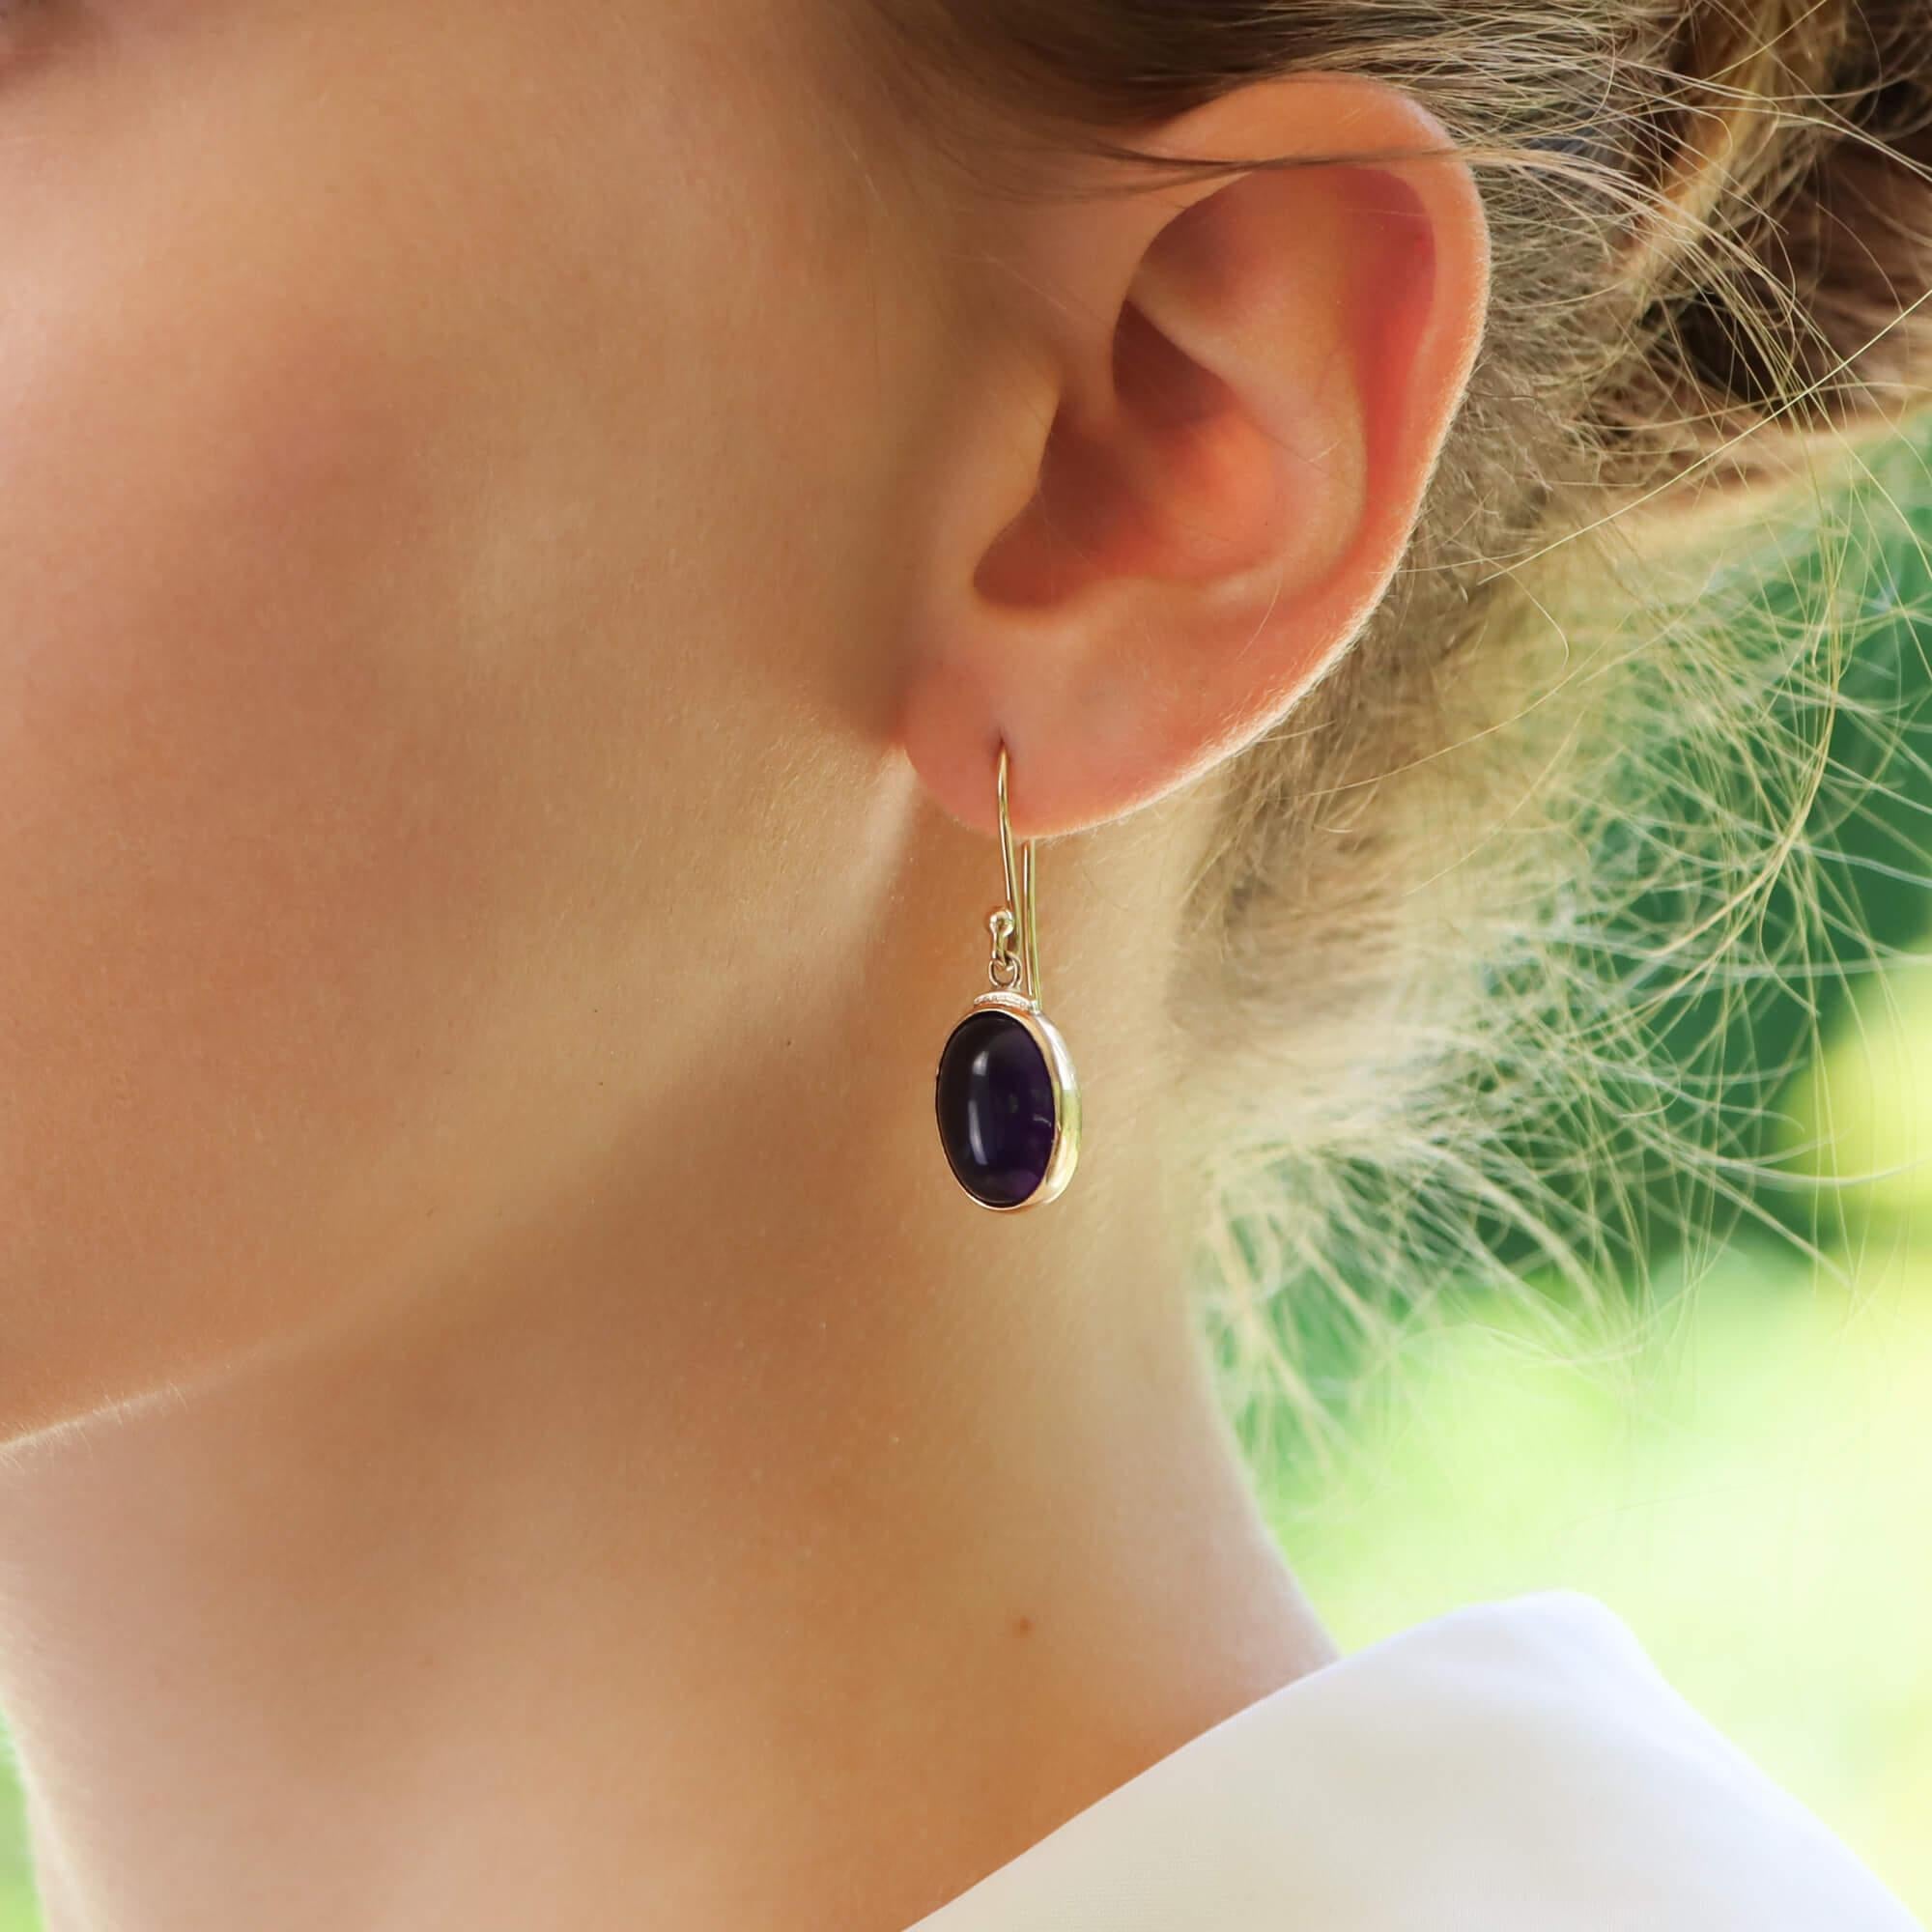  A beautiful pair of amethyst drop earrings set in 9k yellow gold.

Each earring solely features an elegant cabochon oval amethyst stone which is securely rub over set. The amethysts have a fantastic colouring and lustre to them which make them